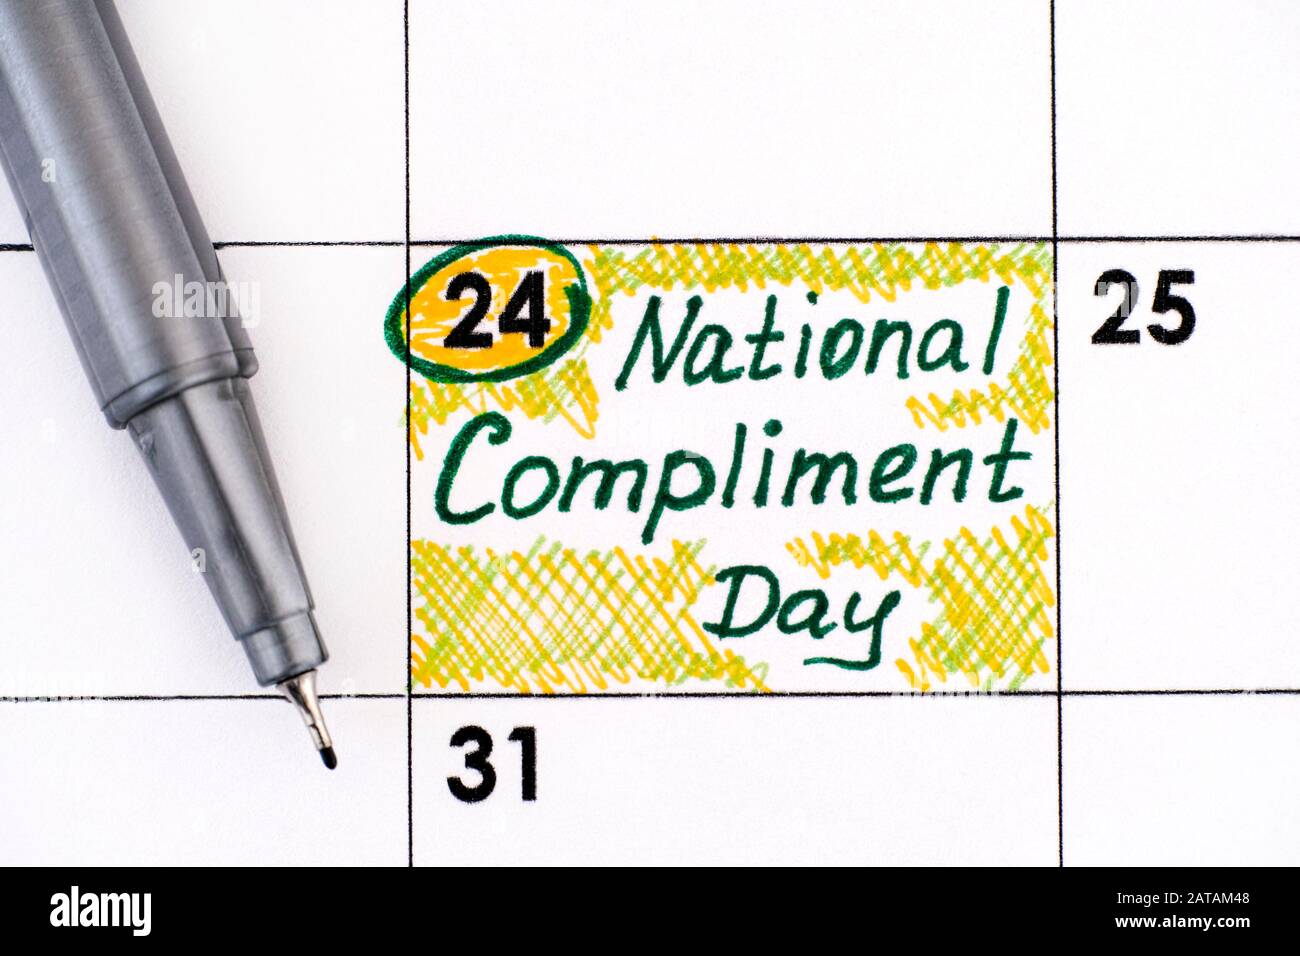 Reminder National Compliment Day in calendar with pen. January 24. Stock Photo